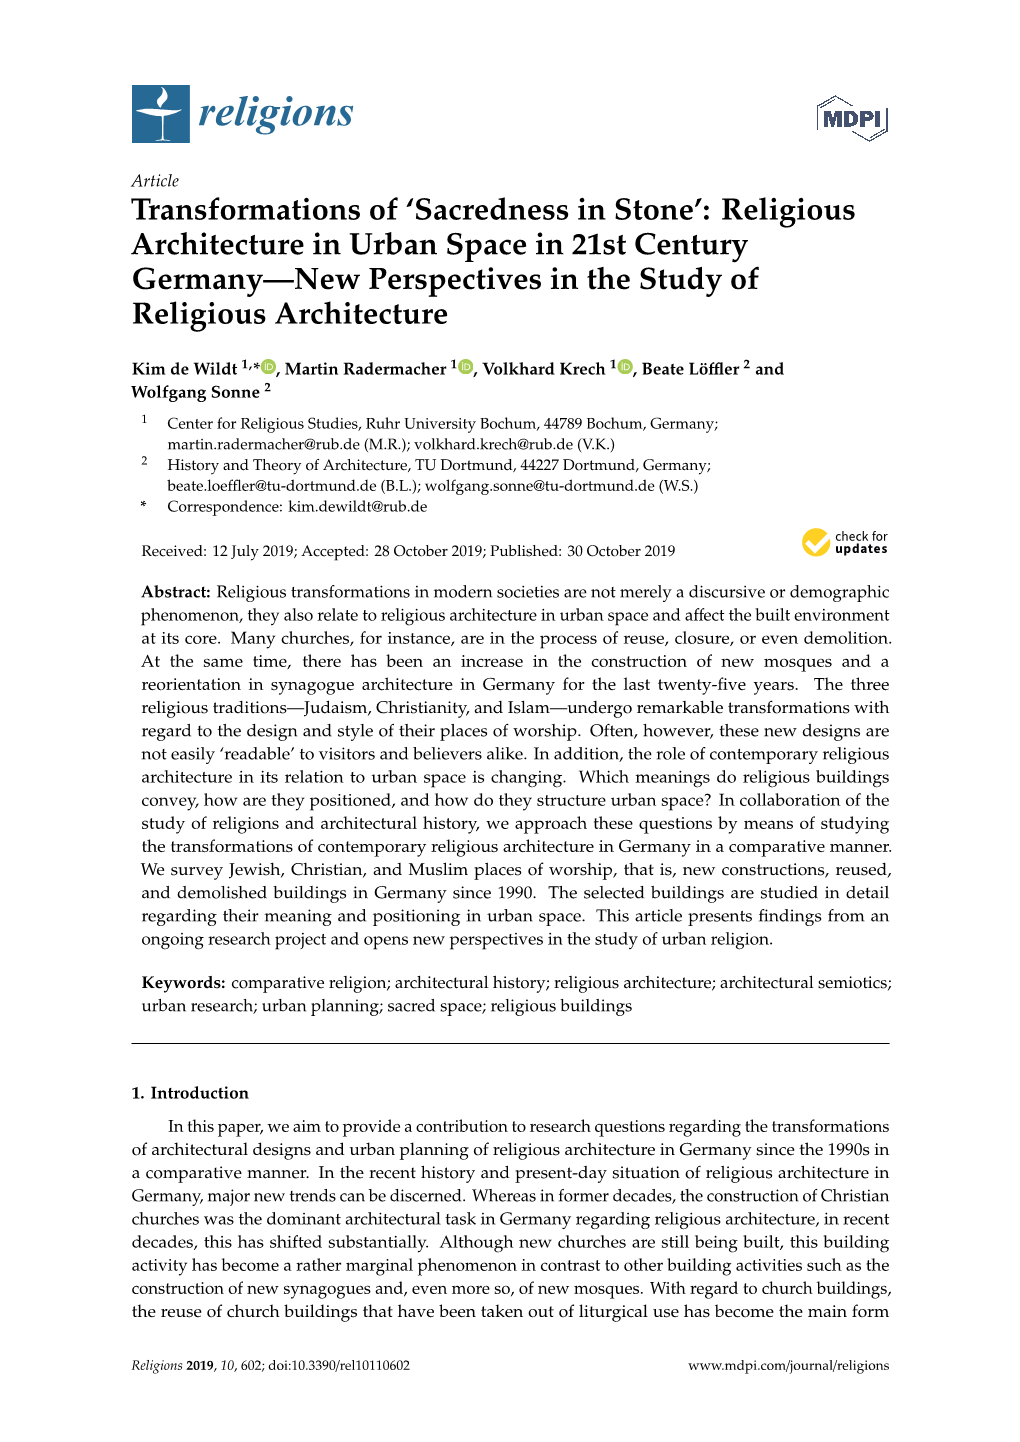 Religious Architecture in Urban Space in 21St Century Germany—New Perspectives in the Study of Religious Architecture